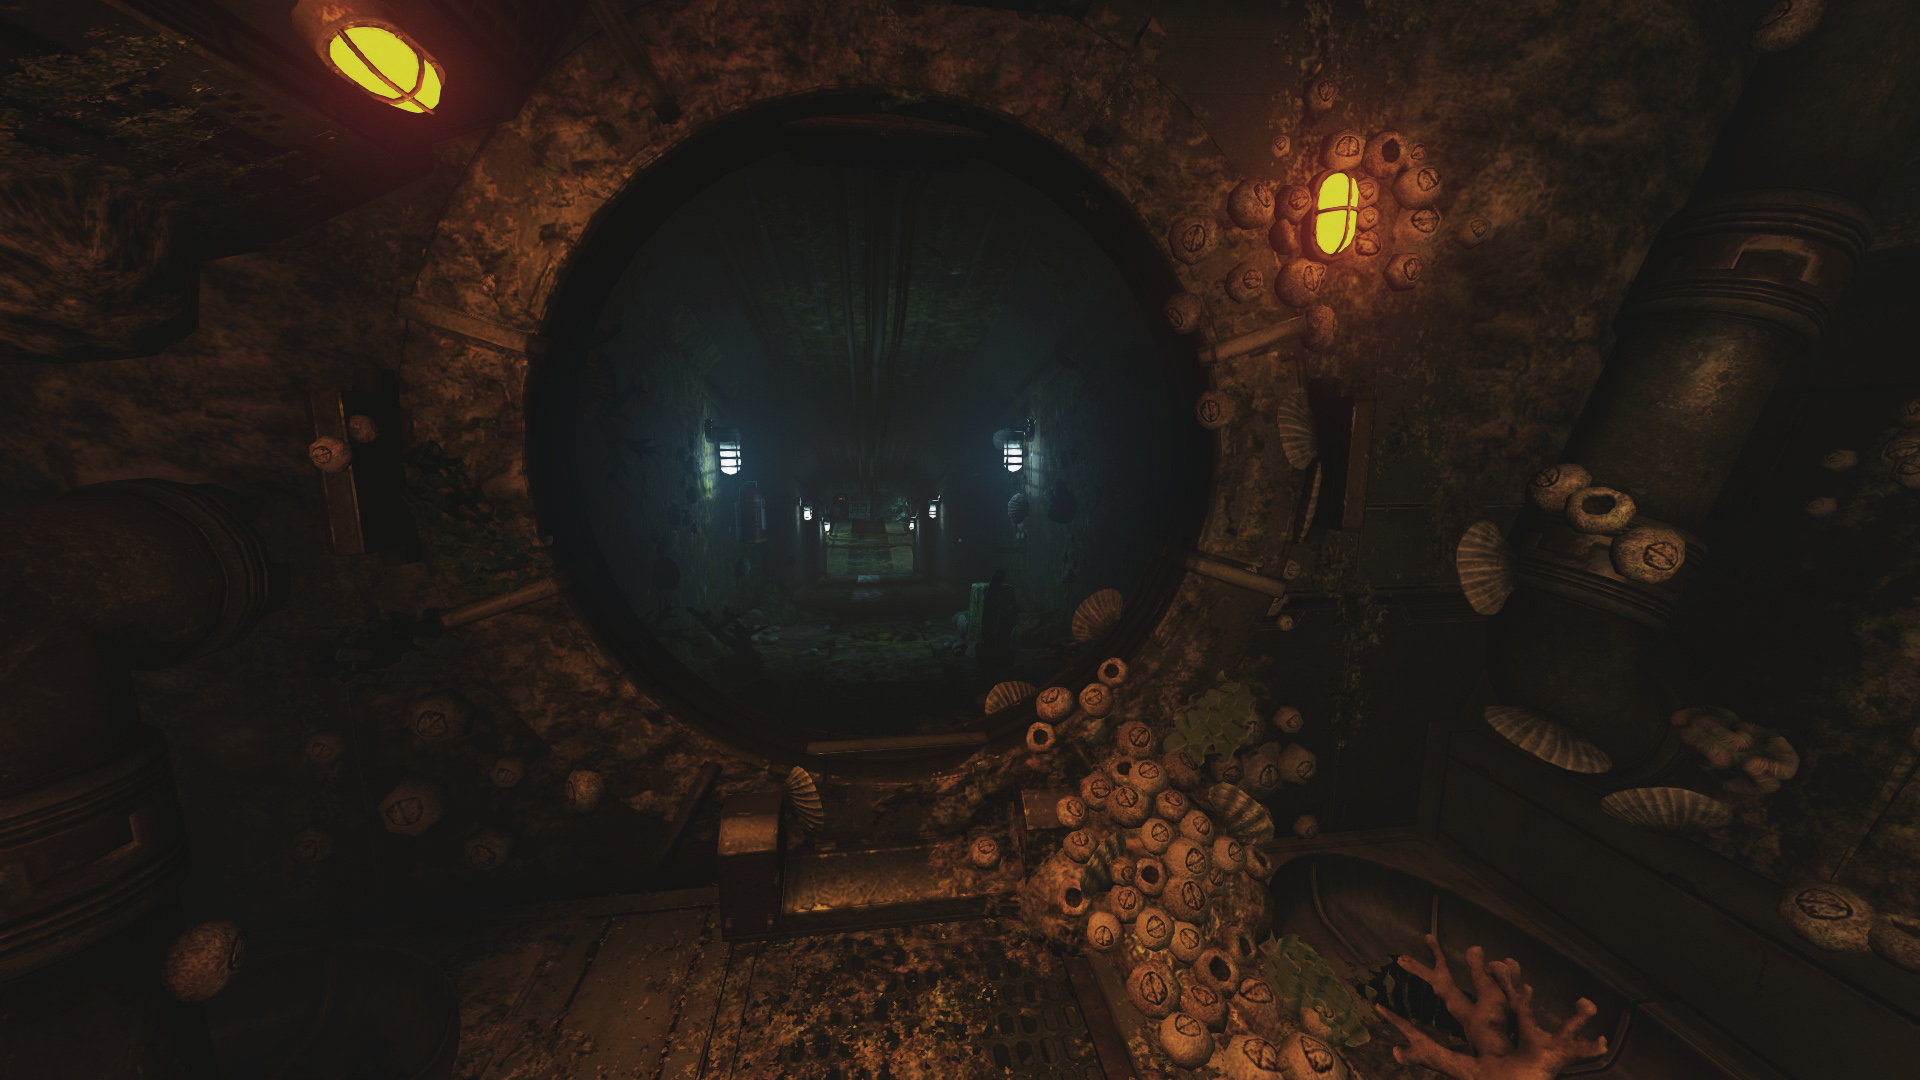 Latest SOMA Trailer Highlights the Eerie PATHOS-II Facility - Rely on Horror